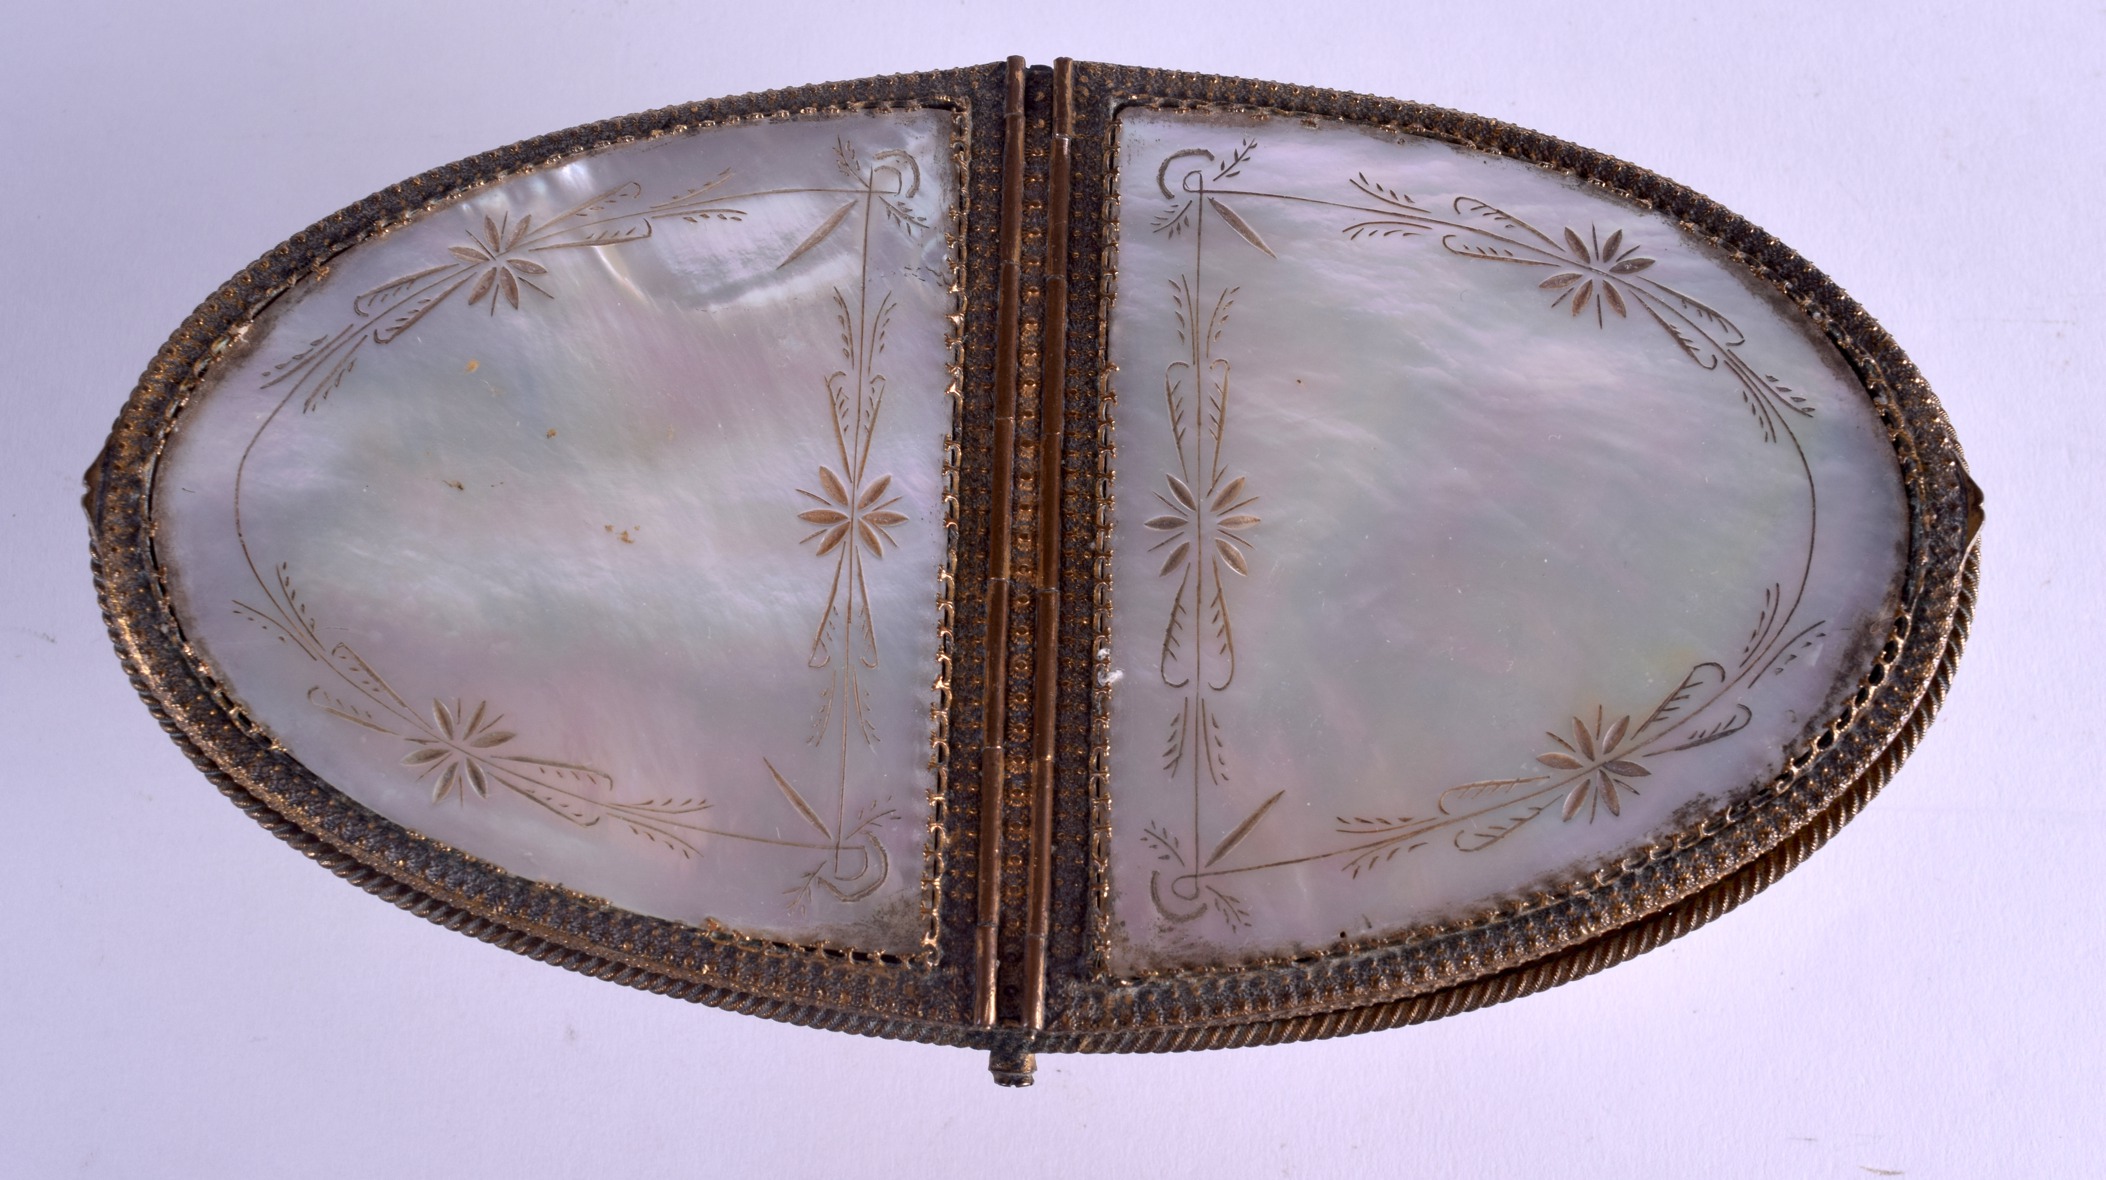 A LOVELY MID 19TH CENTURY FRENCH PALAIS ROYALE OVAL BOX inset with panels of mother of pearl - Image 4 of 6